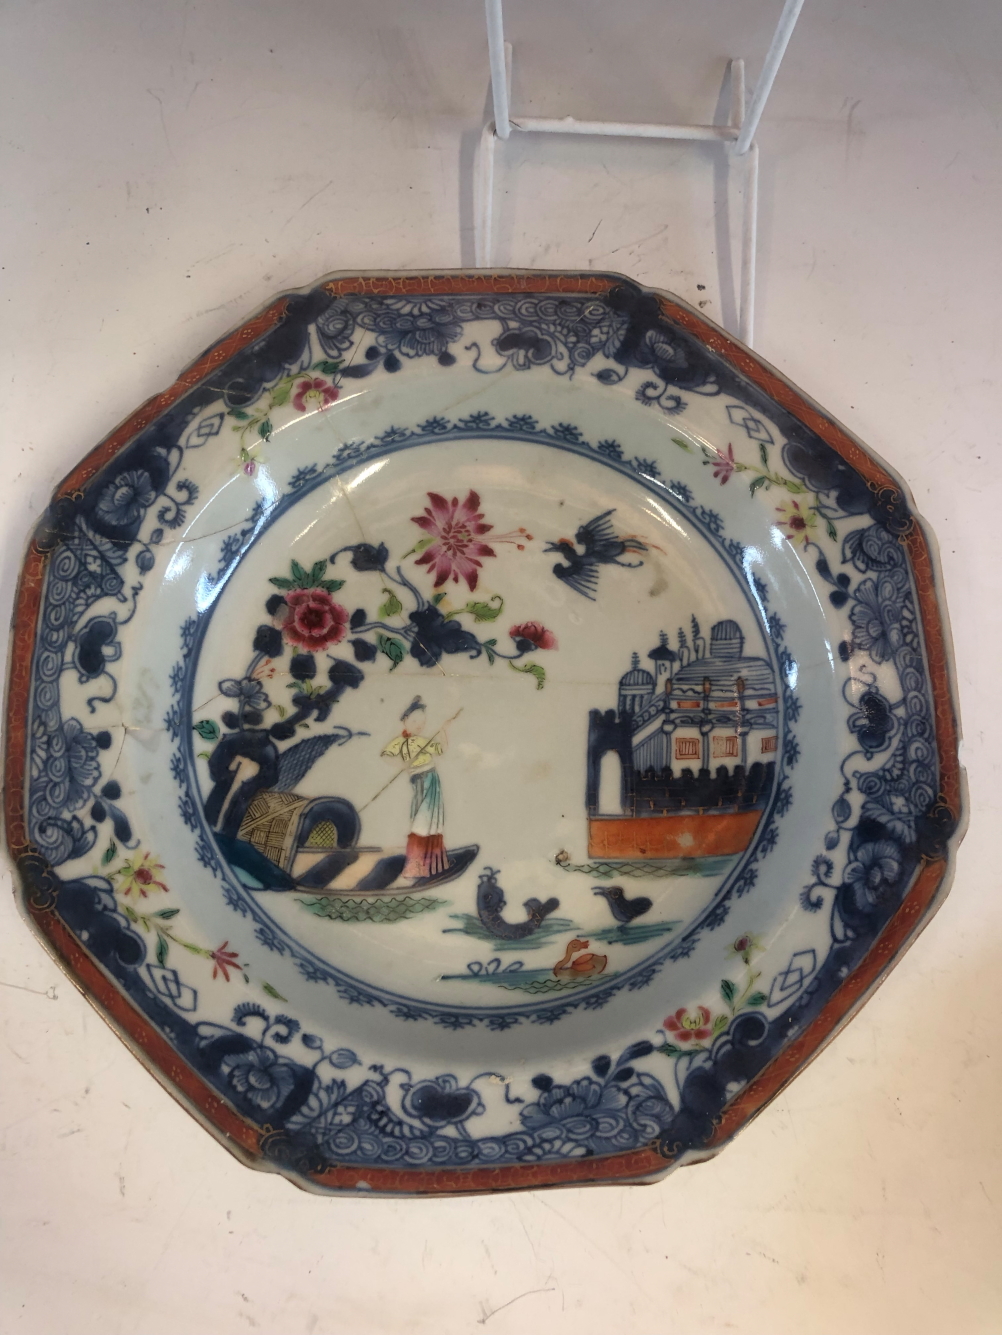 SIX LATE 18th C CHINESE SOUP PLATES PAINTED IN UNDERGLAZE BLUE AND FAMILLE ROSE WITH A LADY - Image 8 of 29